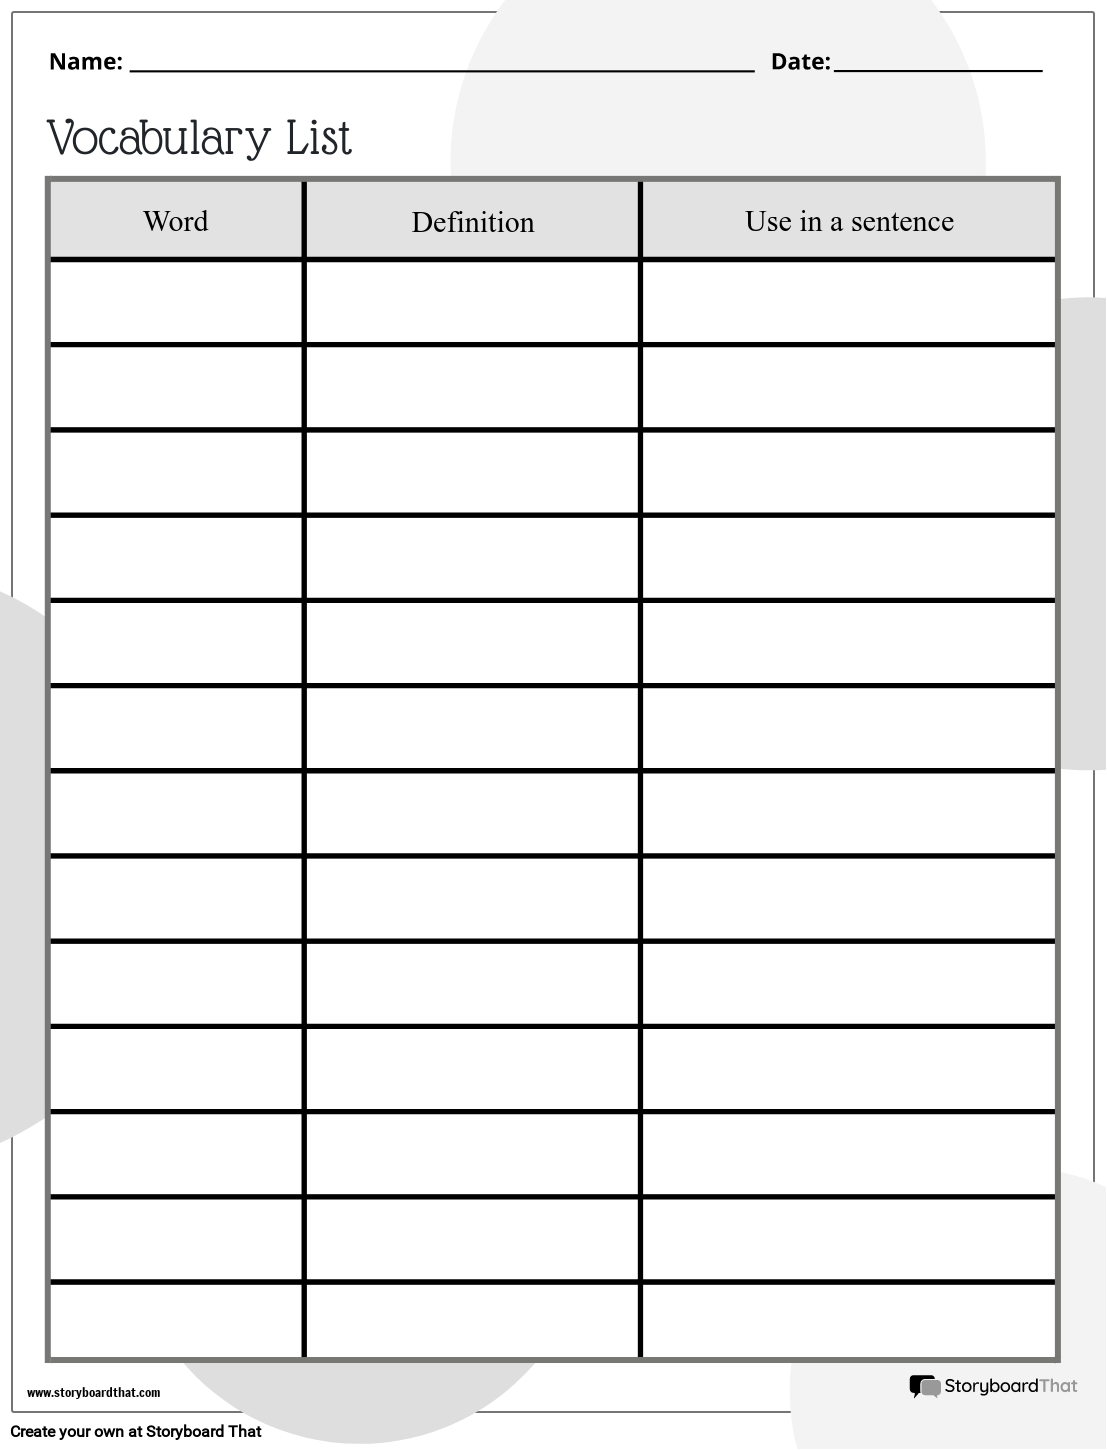 free-vocabulary-worksheet-templates-at-storyboardthat